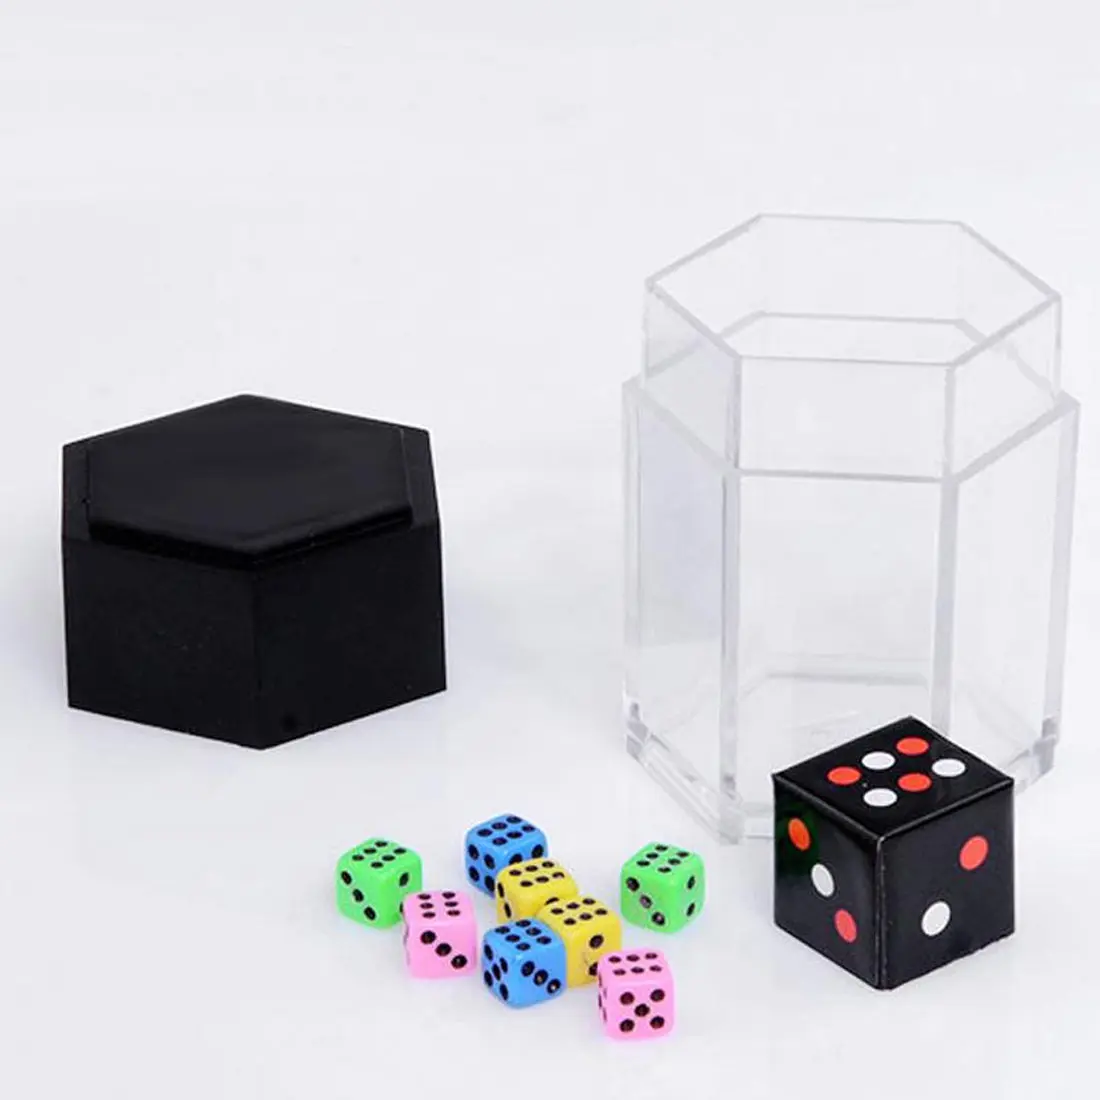 1PC Big Explode Trick Toys Explosion Dice Close Up Magical Trick Joke Prank Toy Children Kids Gift April Fool's Day Gift Toys